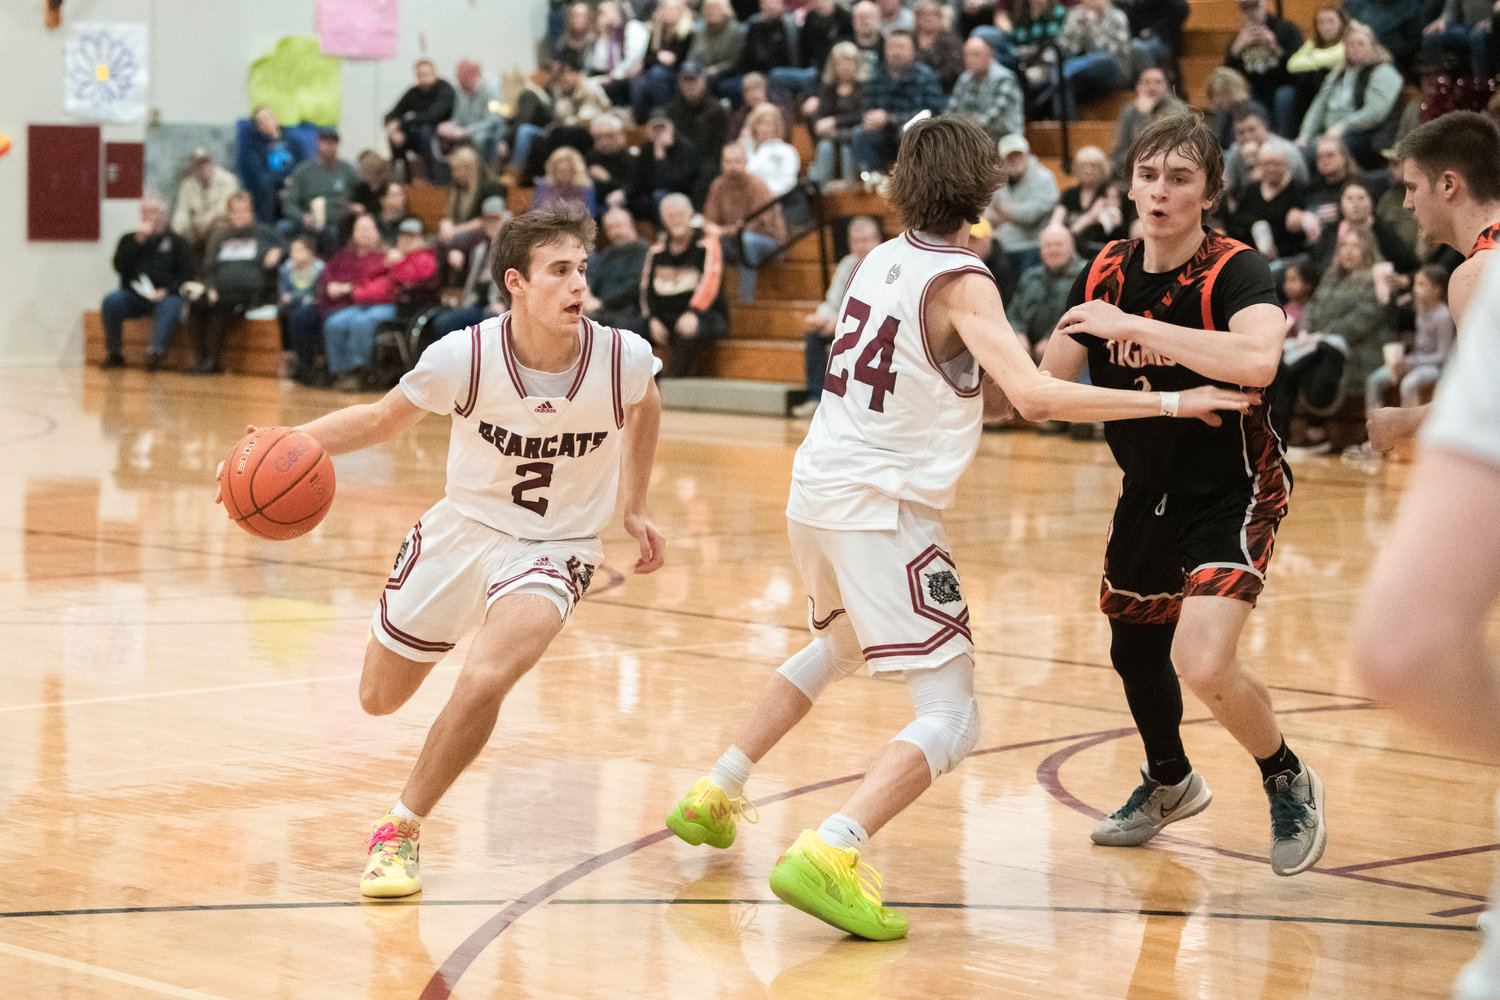 W.F. West junior Braden Jones (2) dribbles toward the basket during a Tuesday night game in Chehalis.